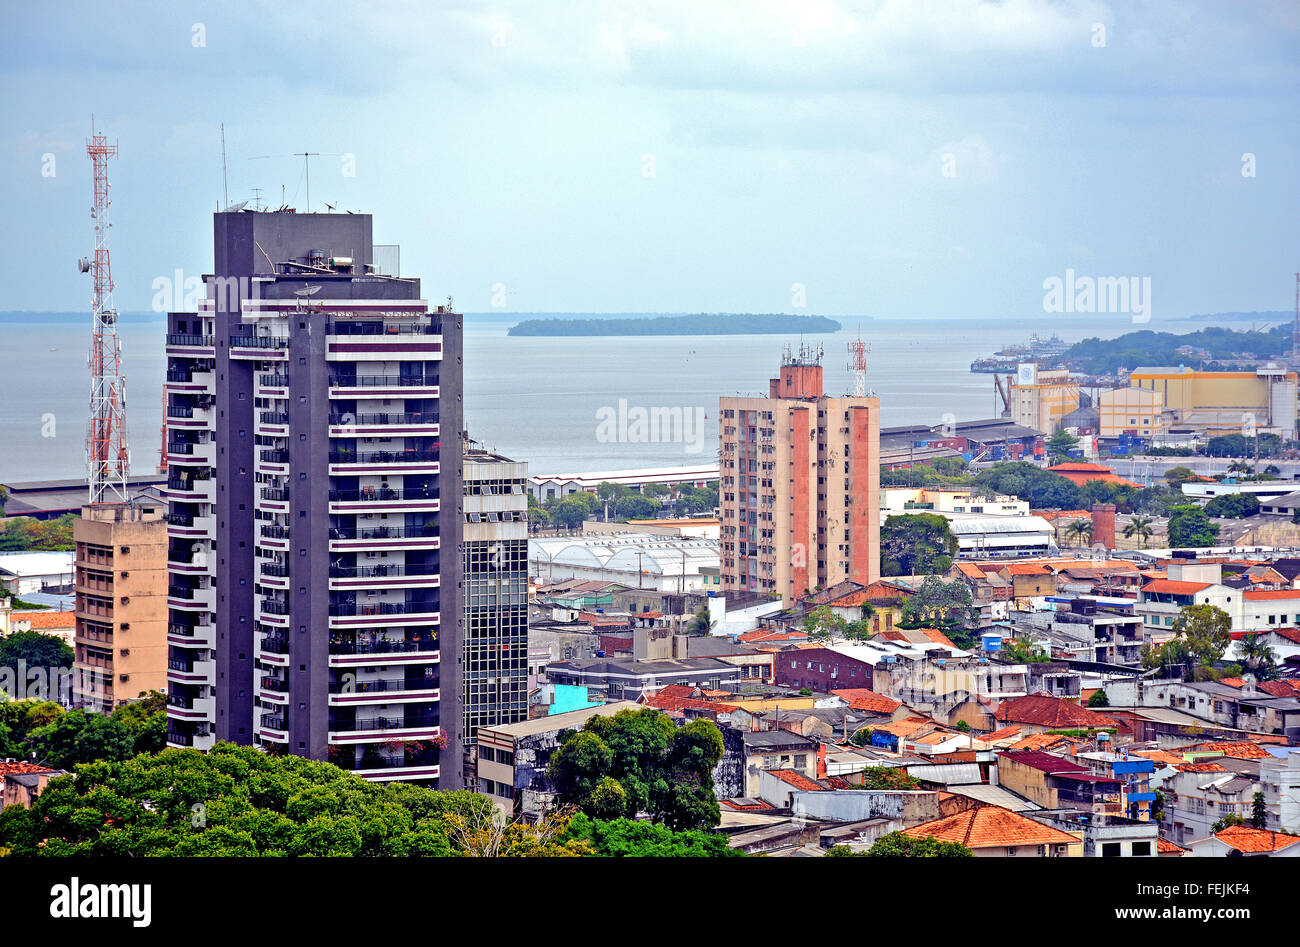 aerial view on port district and Guama river Belem Para Brazil Stock Photo